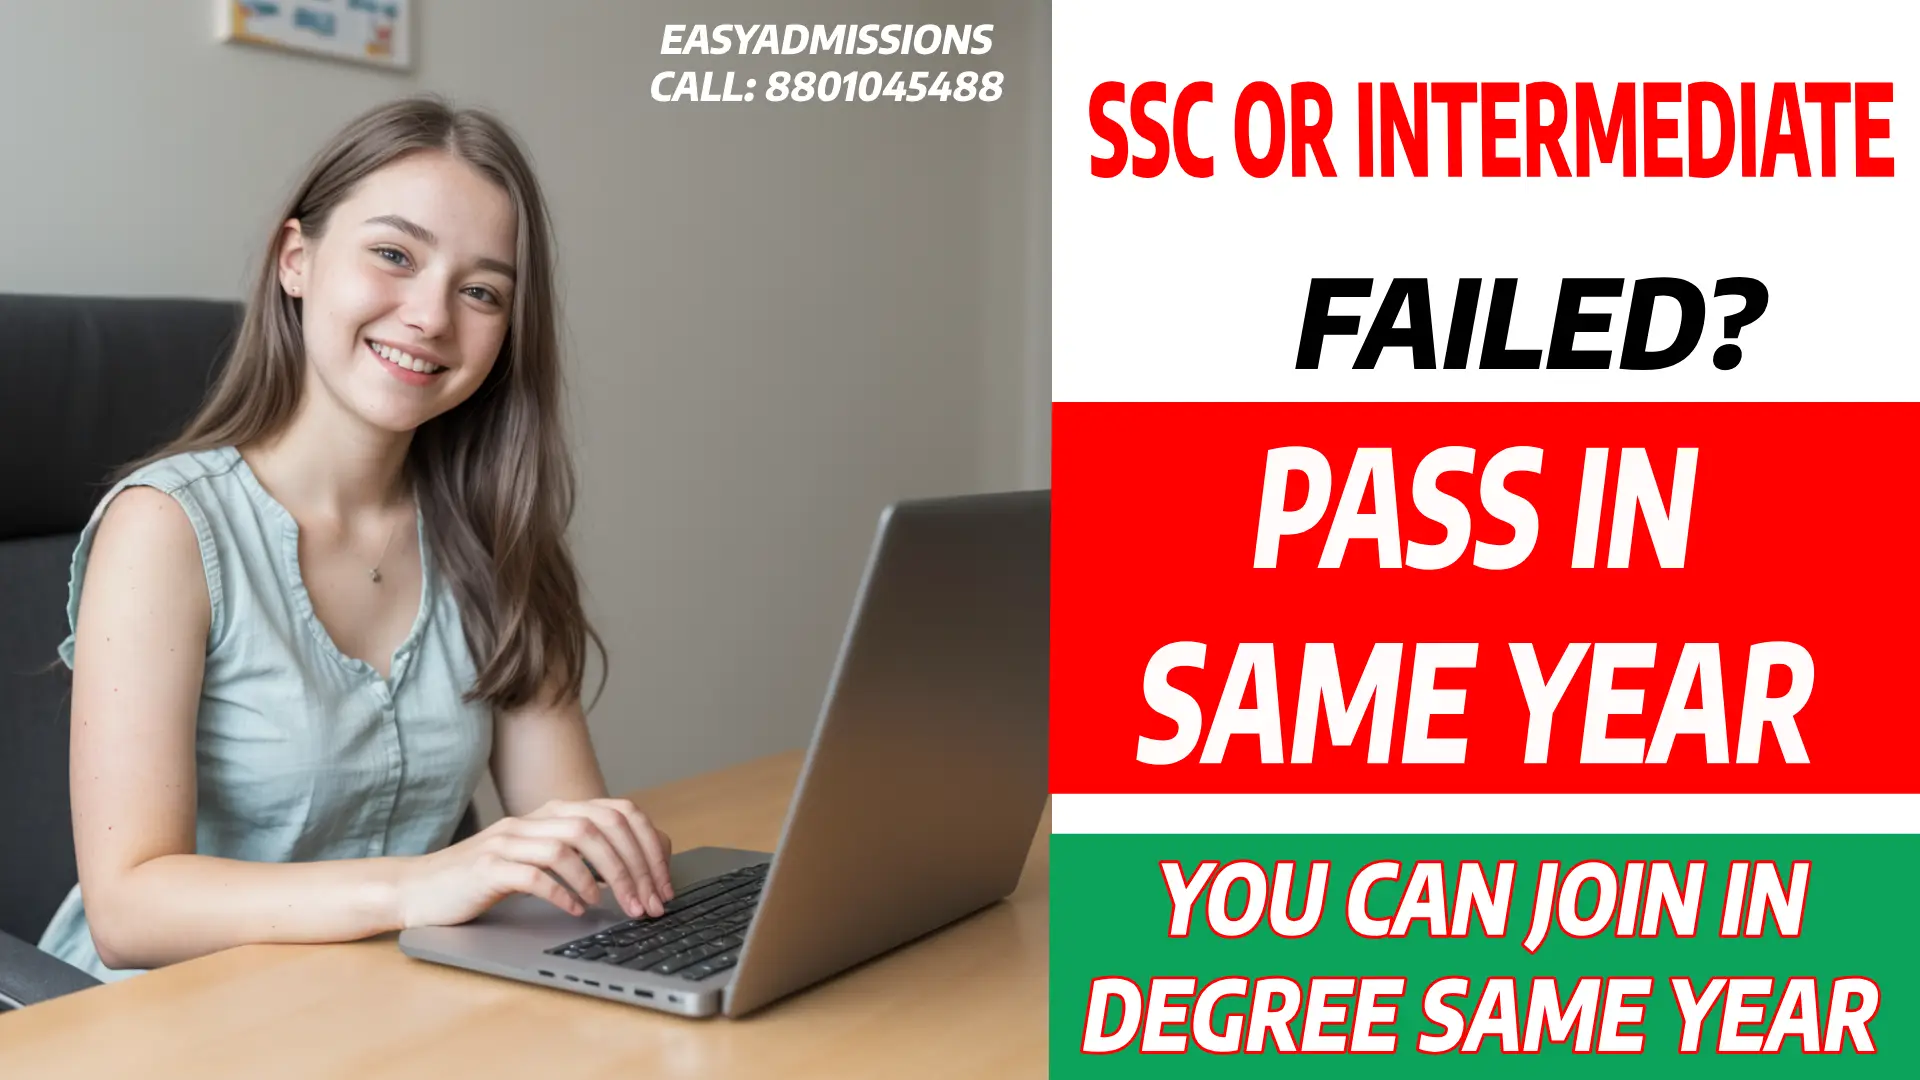 Didn’t Pass Your Inter Exams? Don’t Worry, Here’s What You Can Do!